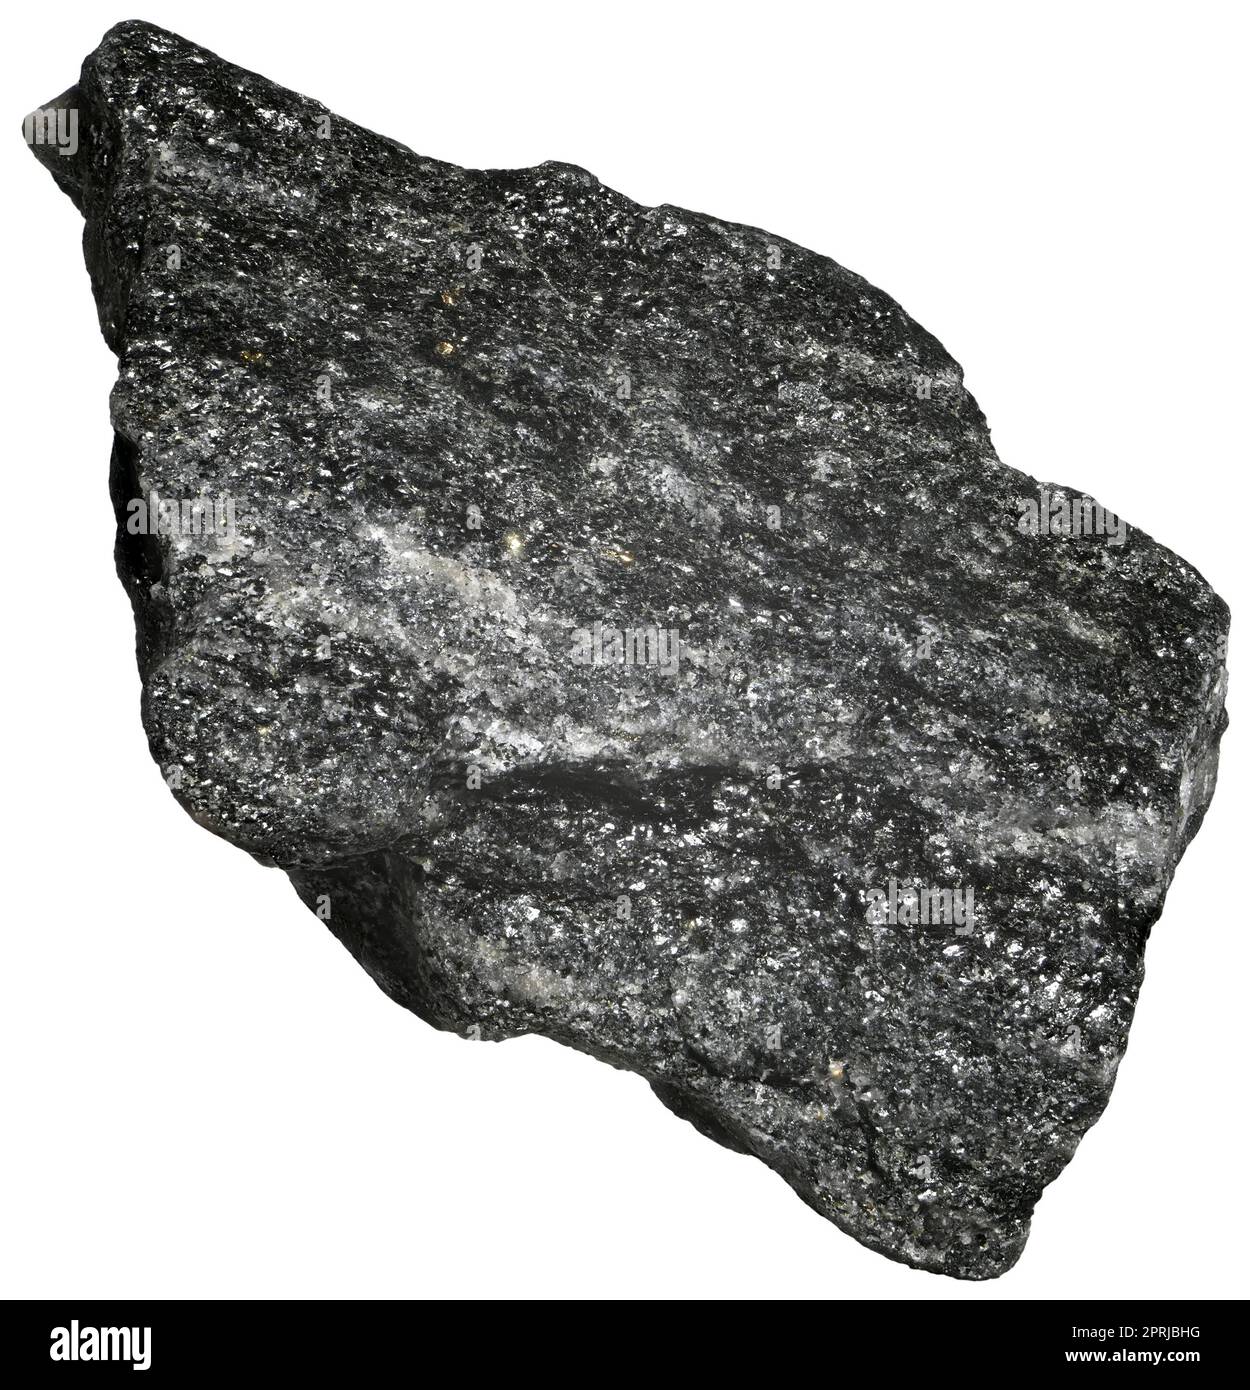 Gneiss (UK) common and widely distributed type of metamorphic rock. Stock Photo